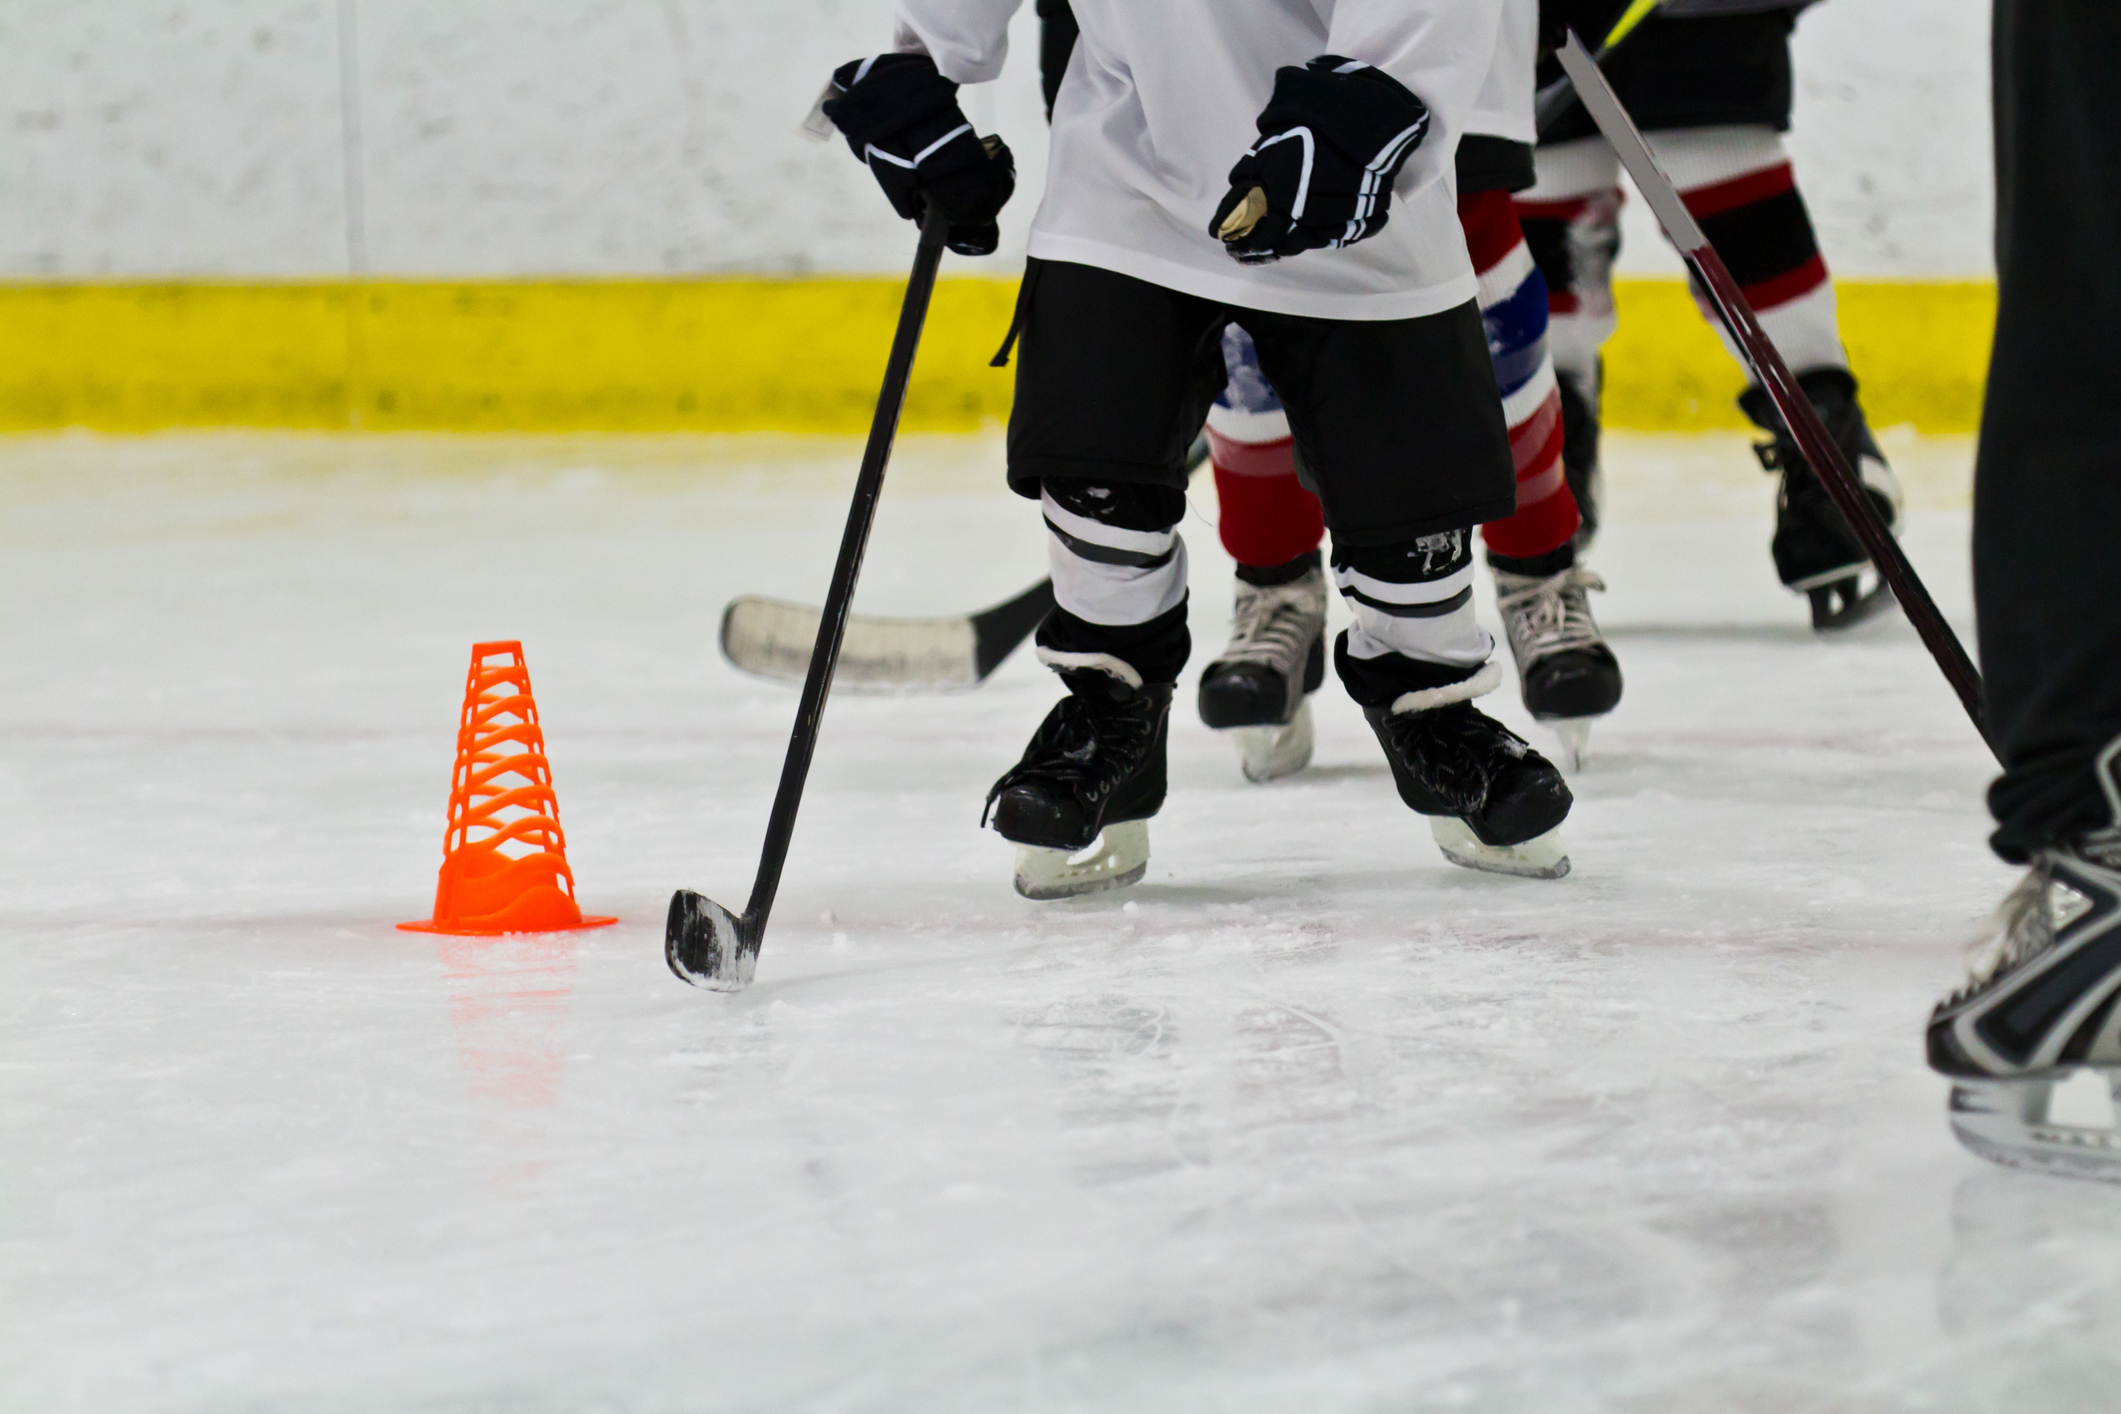 Get in on the Action with Our Adult Hockey Courses!